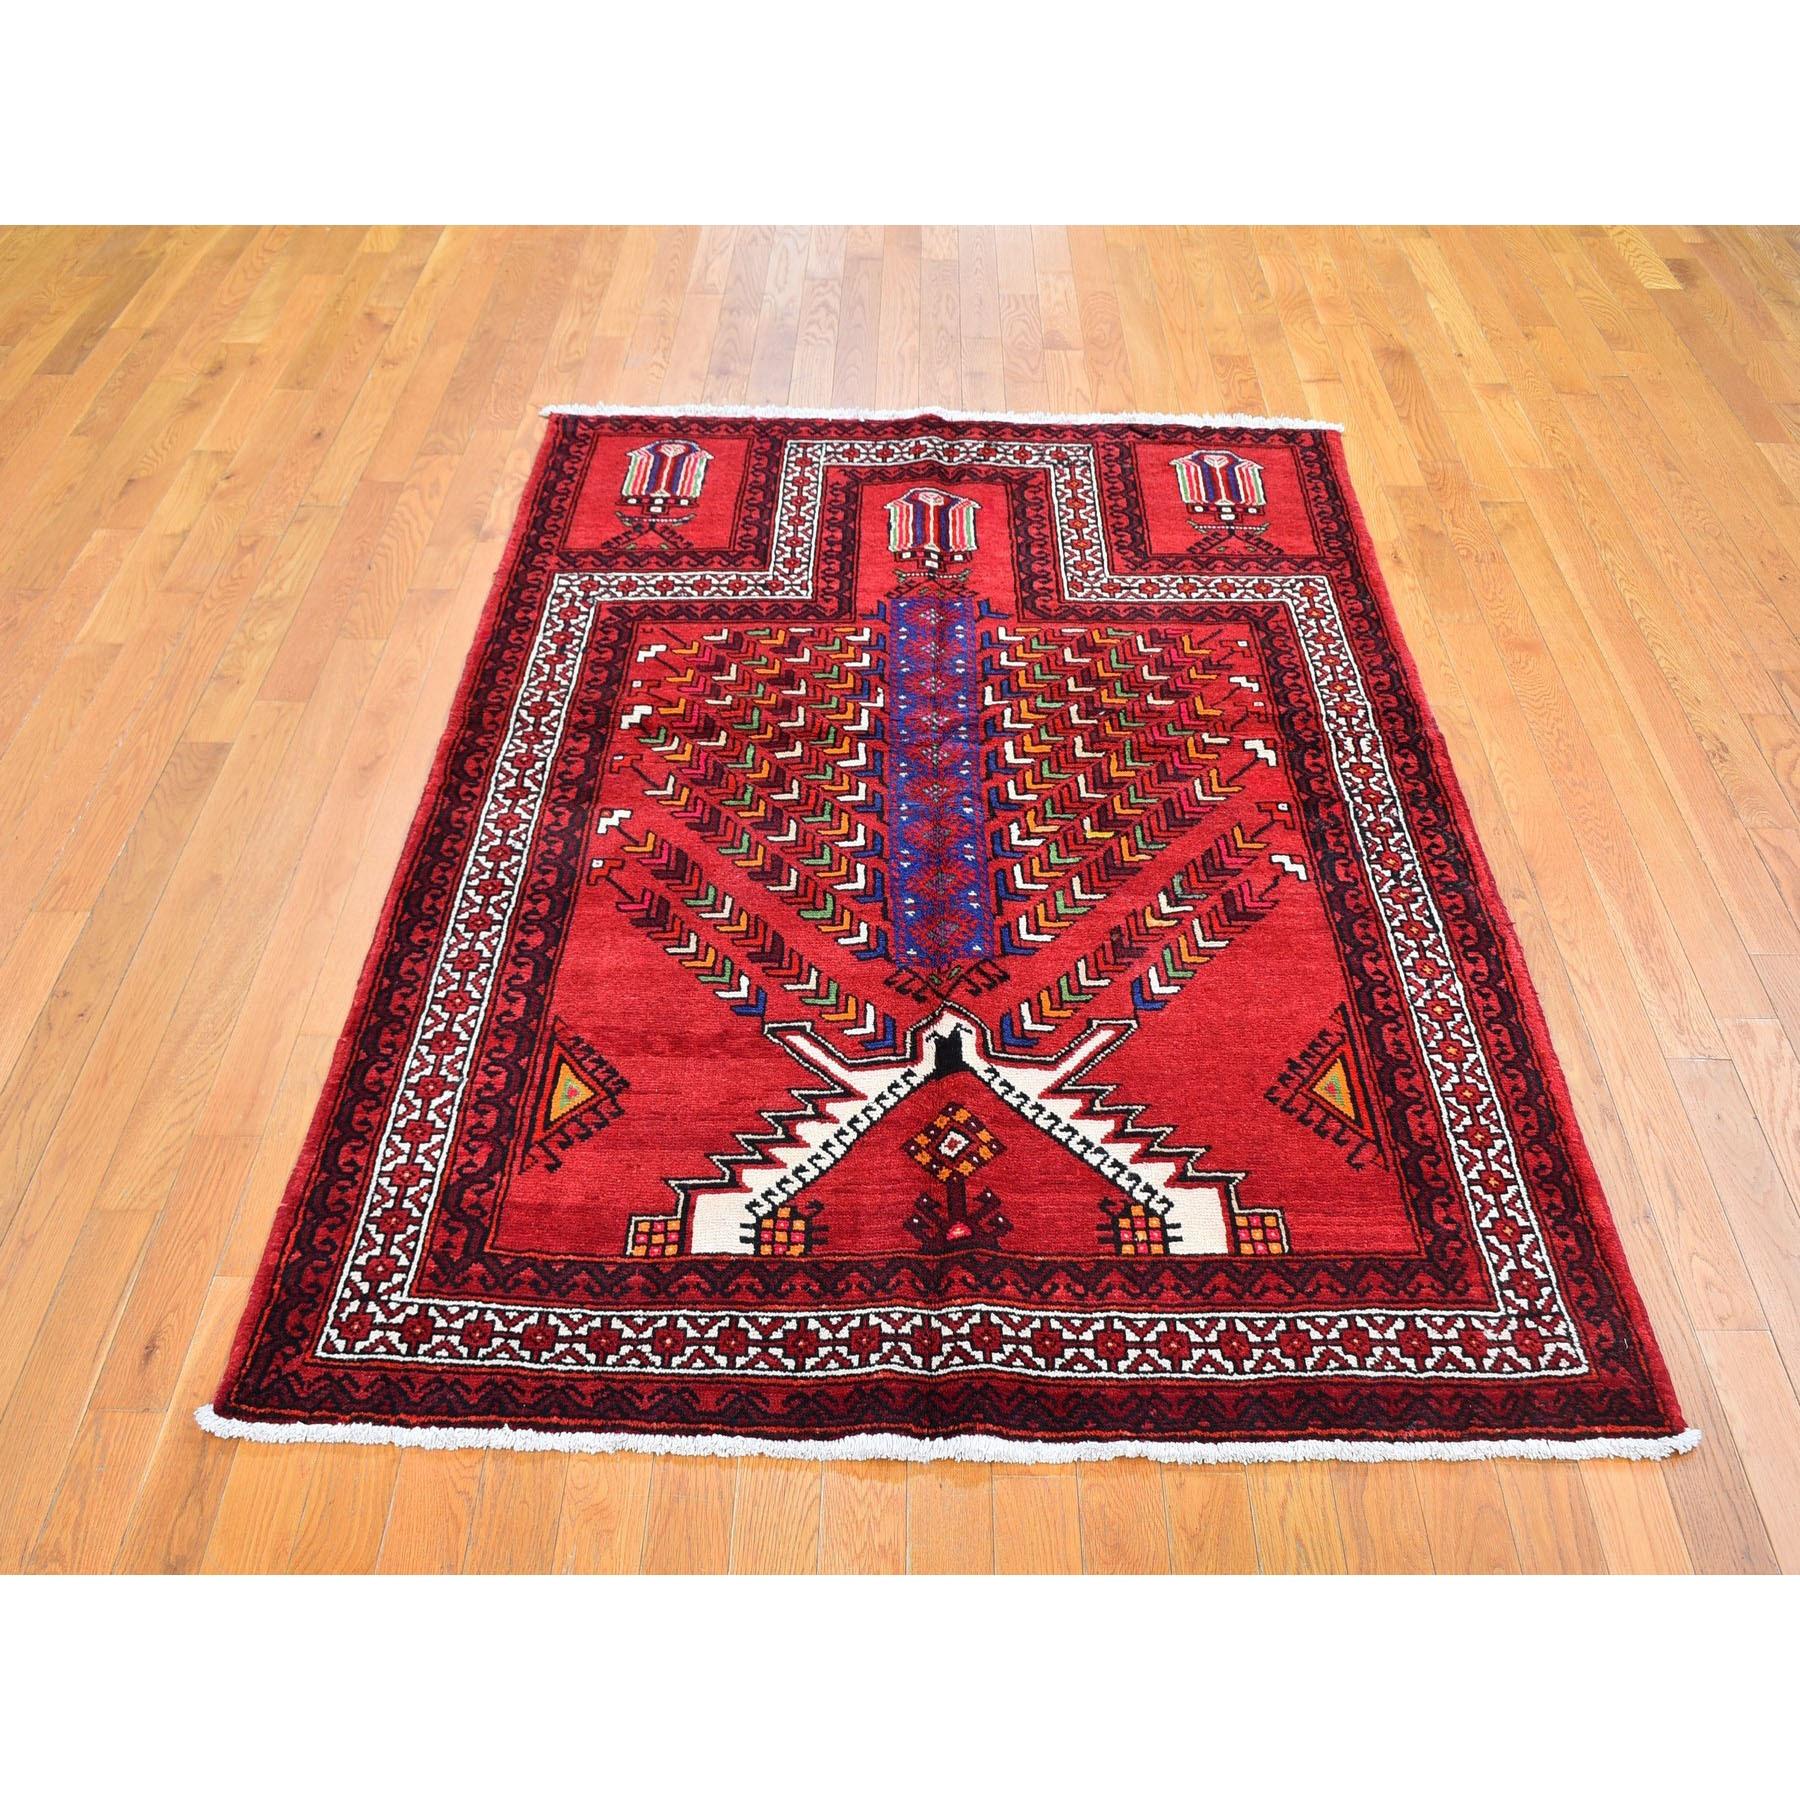 This fabulous hand-knotted carpet has been created and designed for extra strength and durability. This rug has been handcrafted for weeks in the traditional method that is used to make
Exact Rug Size in Feet and Inches : 4'9